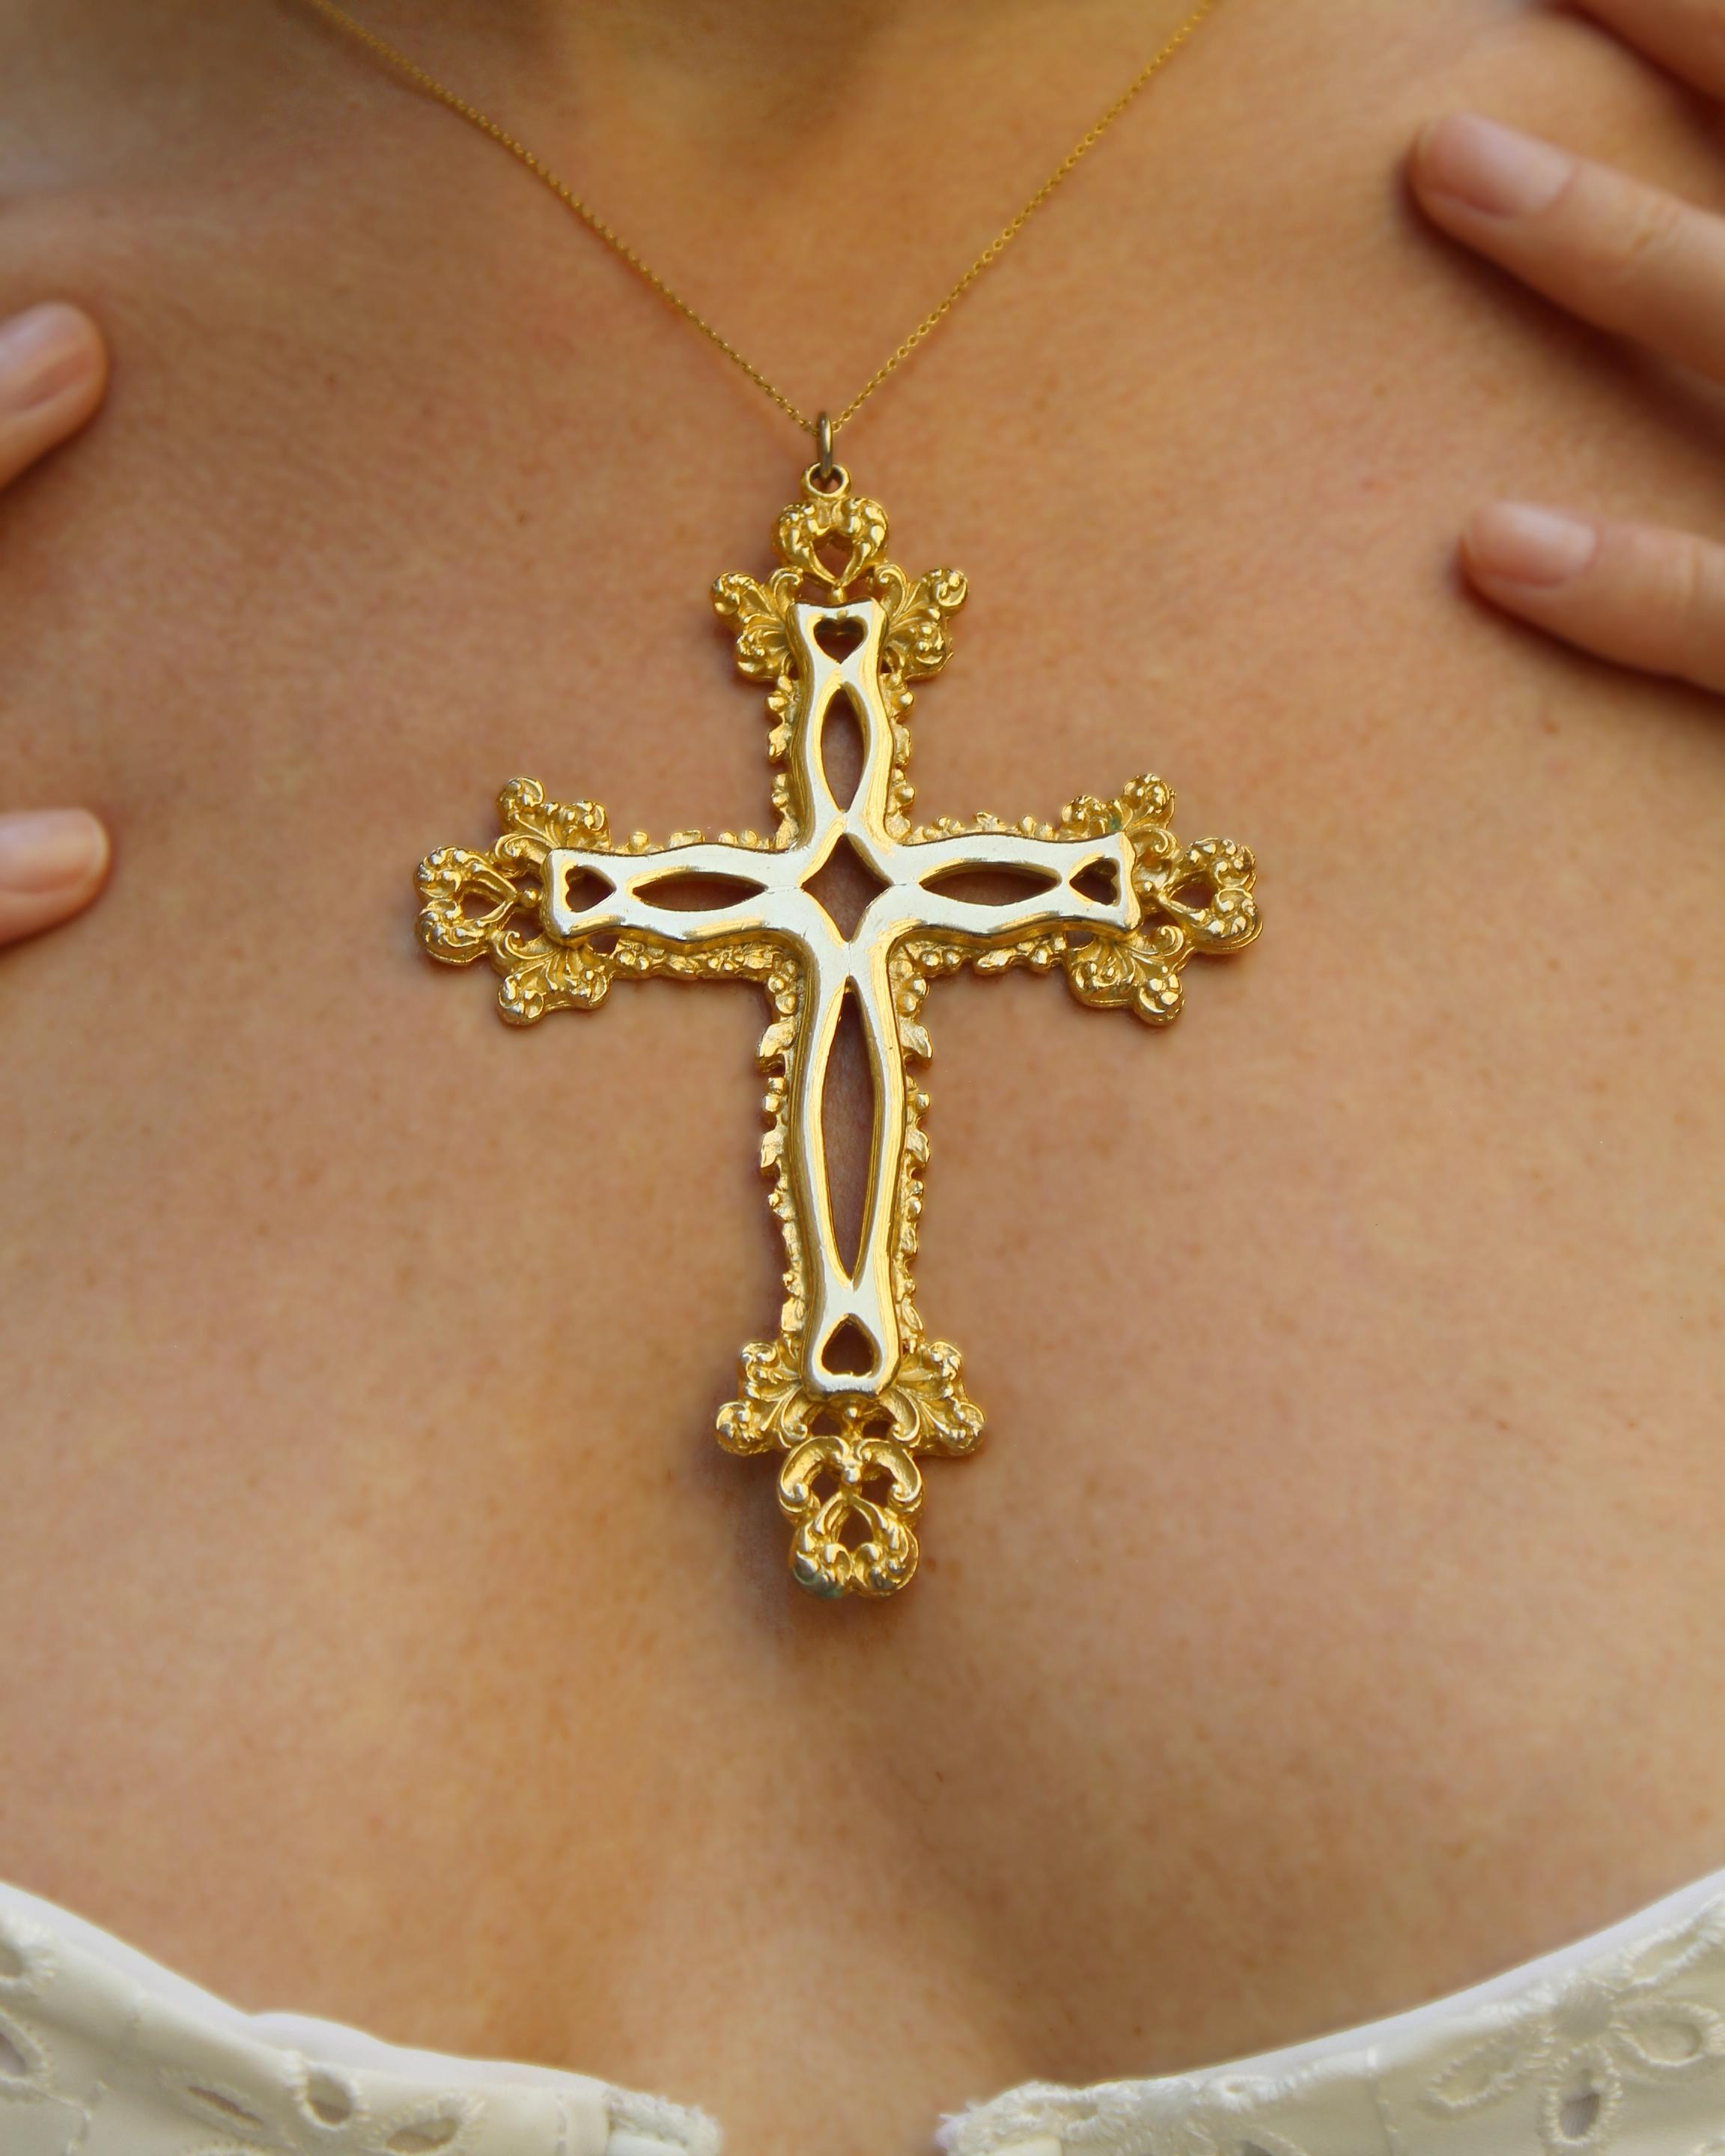 This utterly huge vintage gold cross is such a statement piece— it's giving vintage Dolce & Gabbana vibes, and I'm here for it. It features sculptural baroque details and cutouts, giving it an old-world feeling. The pendant is sold individually, but